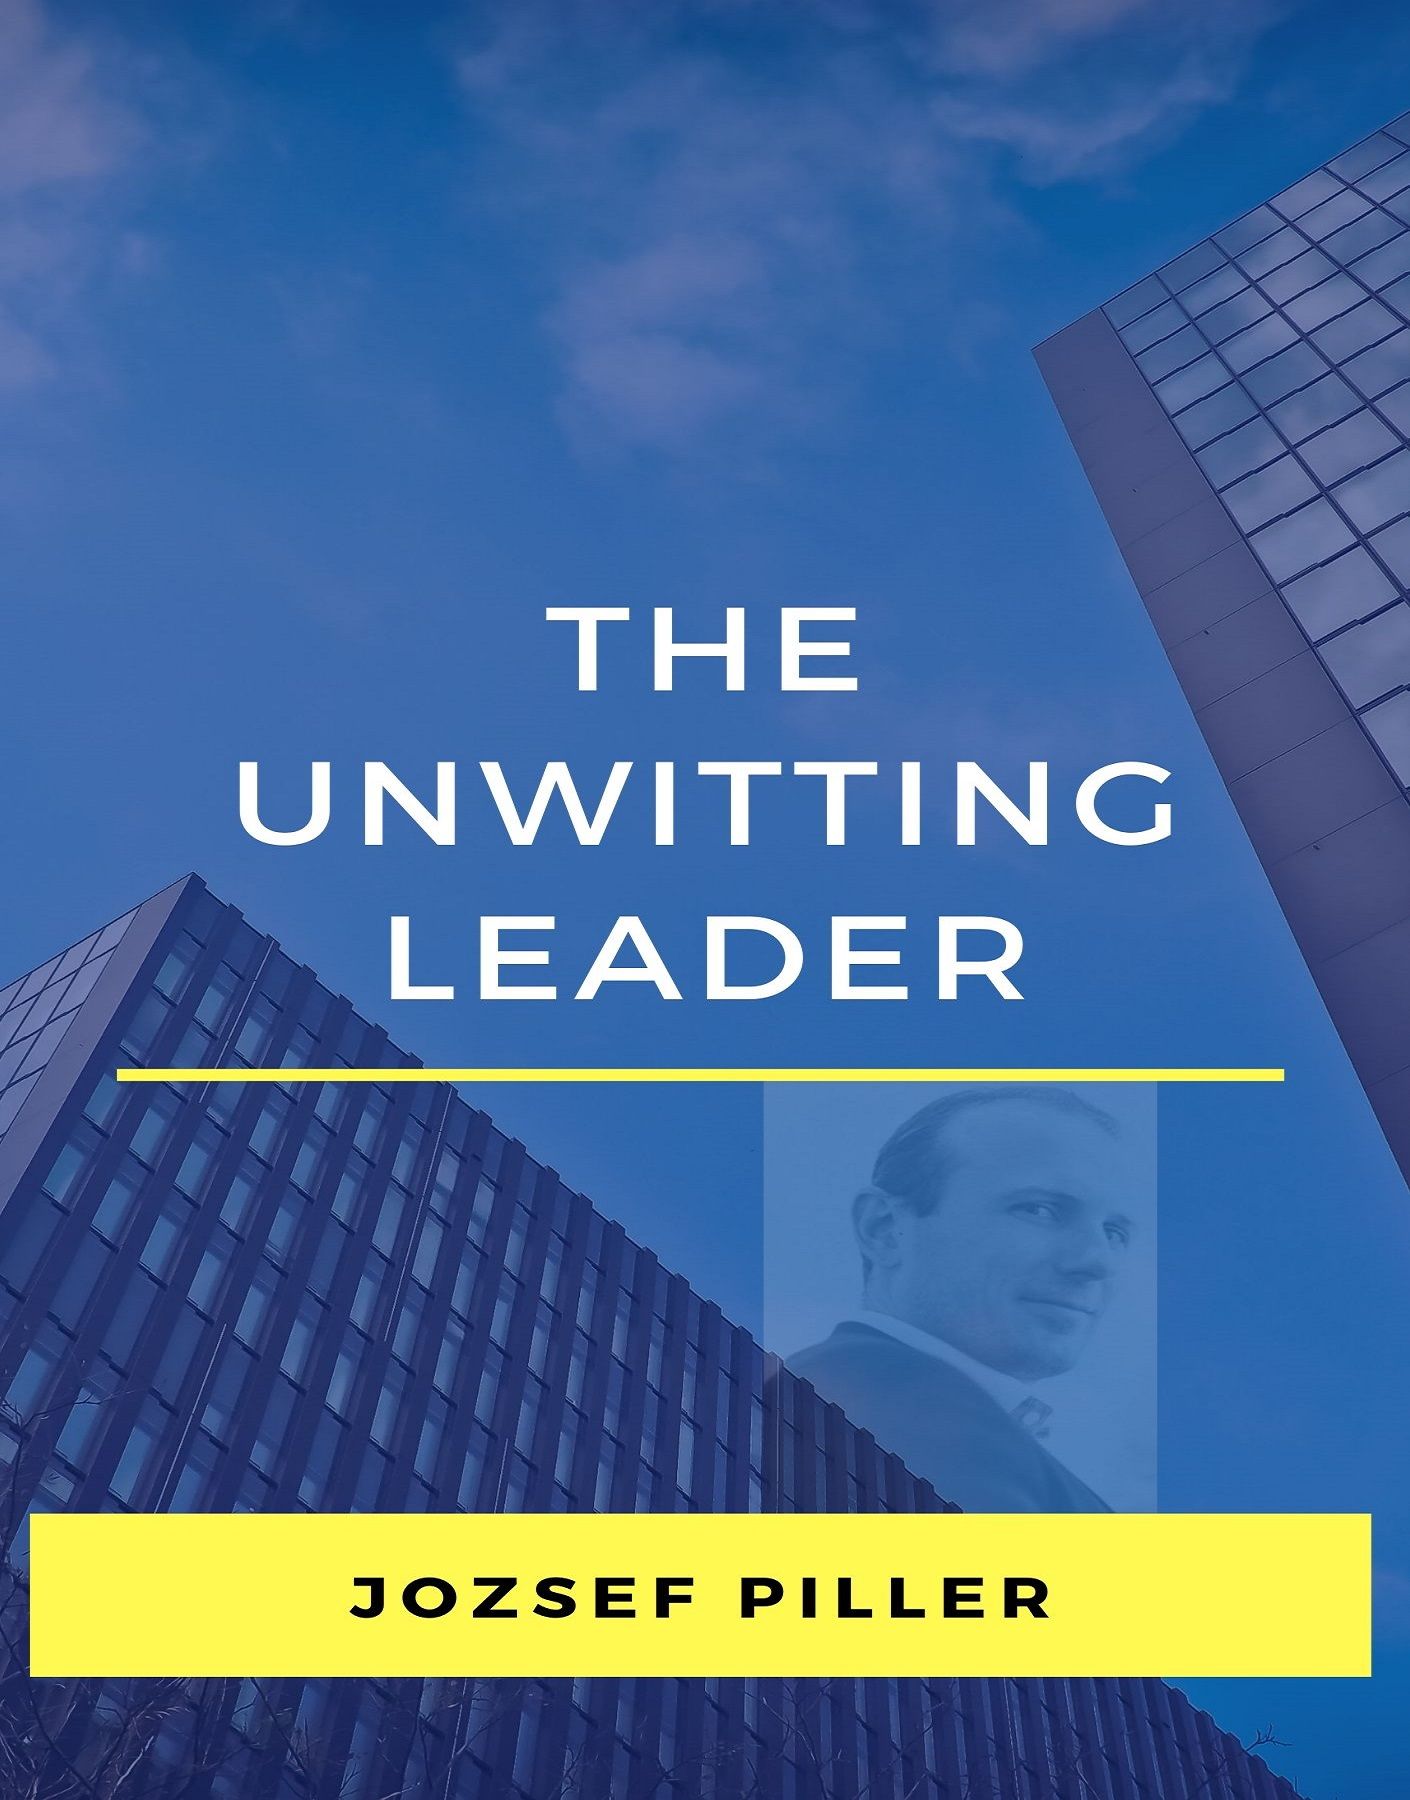 The unwitting leader, audiobook by Jozsef Piller